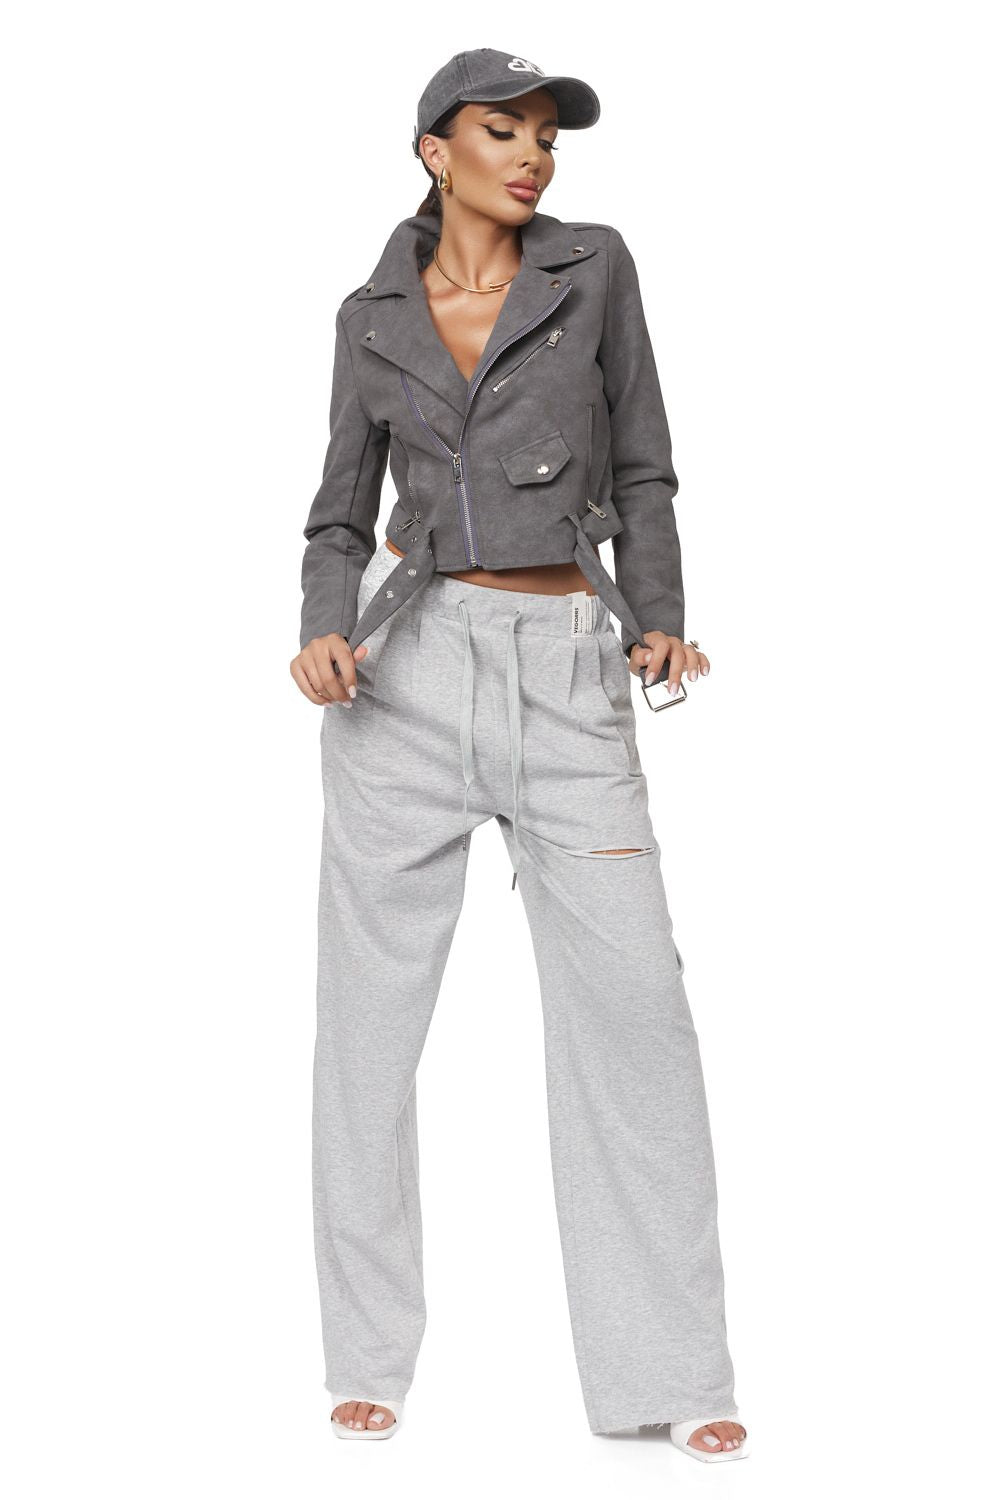 Cotesia Bogas grey casual ladies trousers